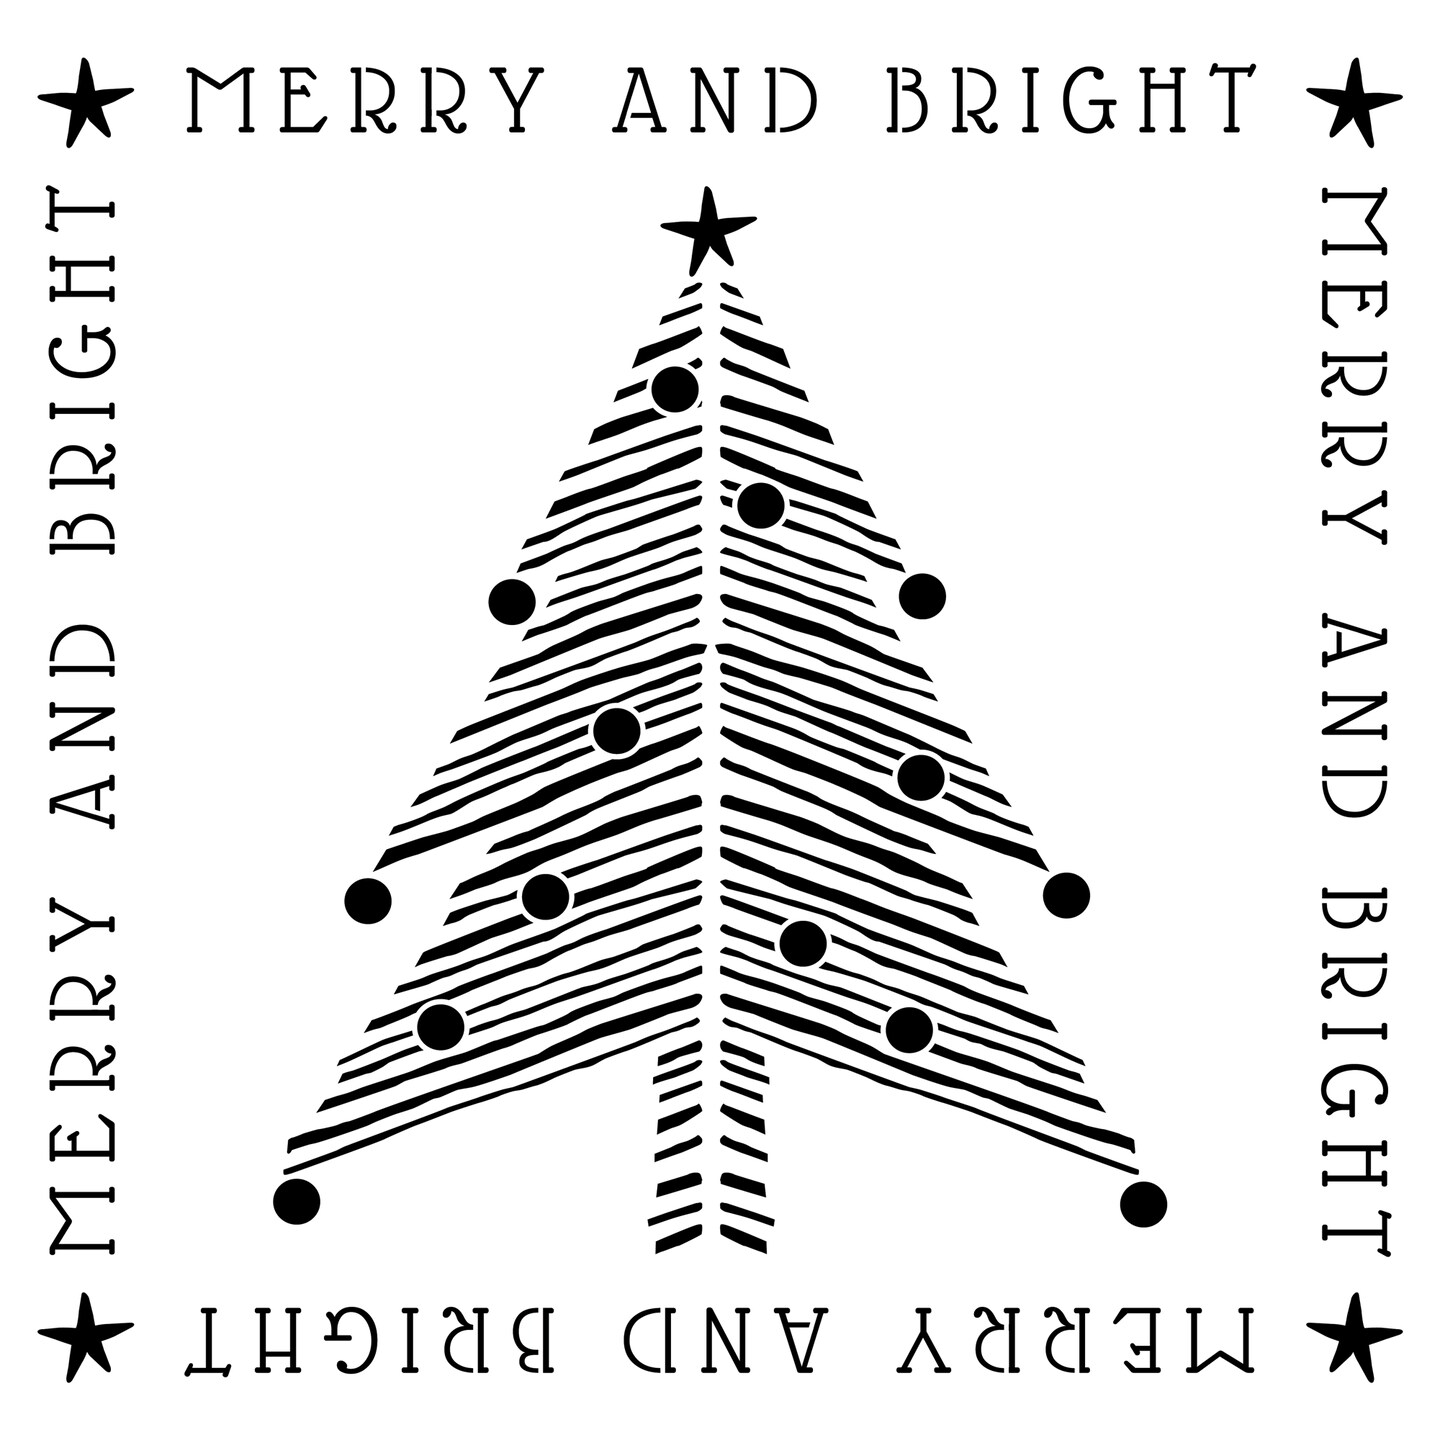 Merry and Bright Handpainted Chevron Christmas Tree Embossing 12 x 12 Stencil | FS110 by Designer Stencils | Word &#x26; Phrase Stencils | Reusable Stencils for Painting on Wood, Wall, Tile, Canvas, Paper, Fabric, Furniture, Floor